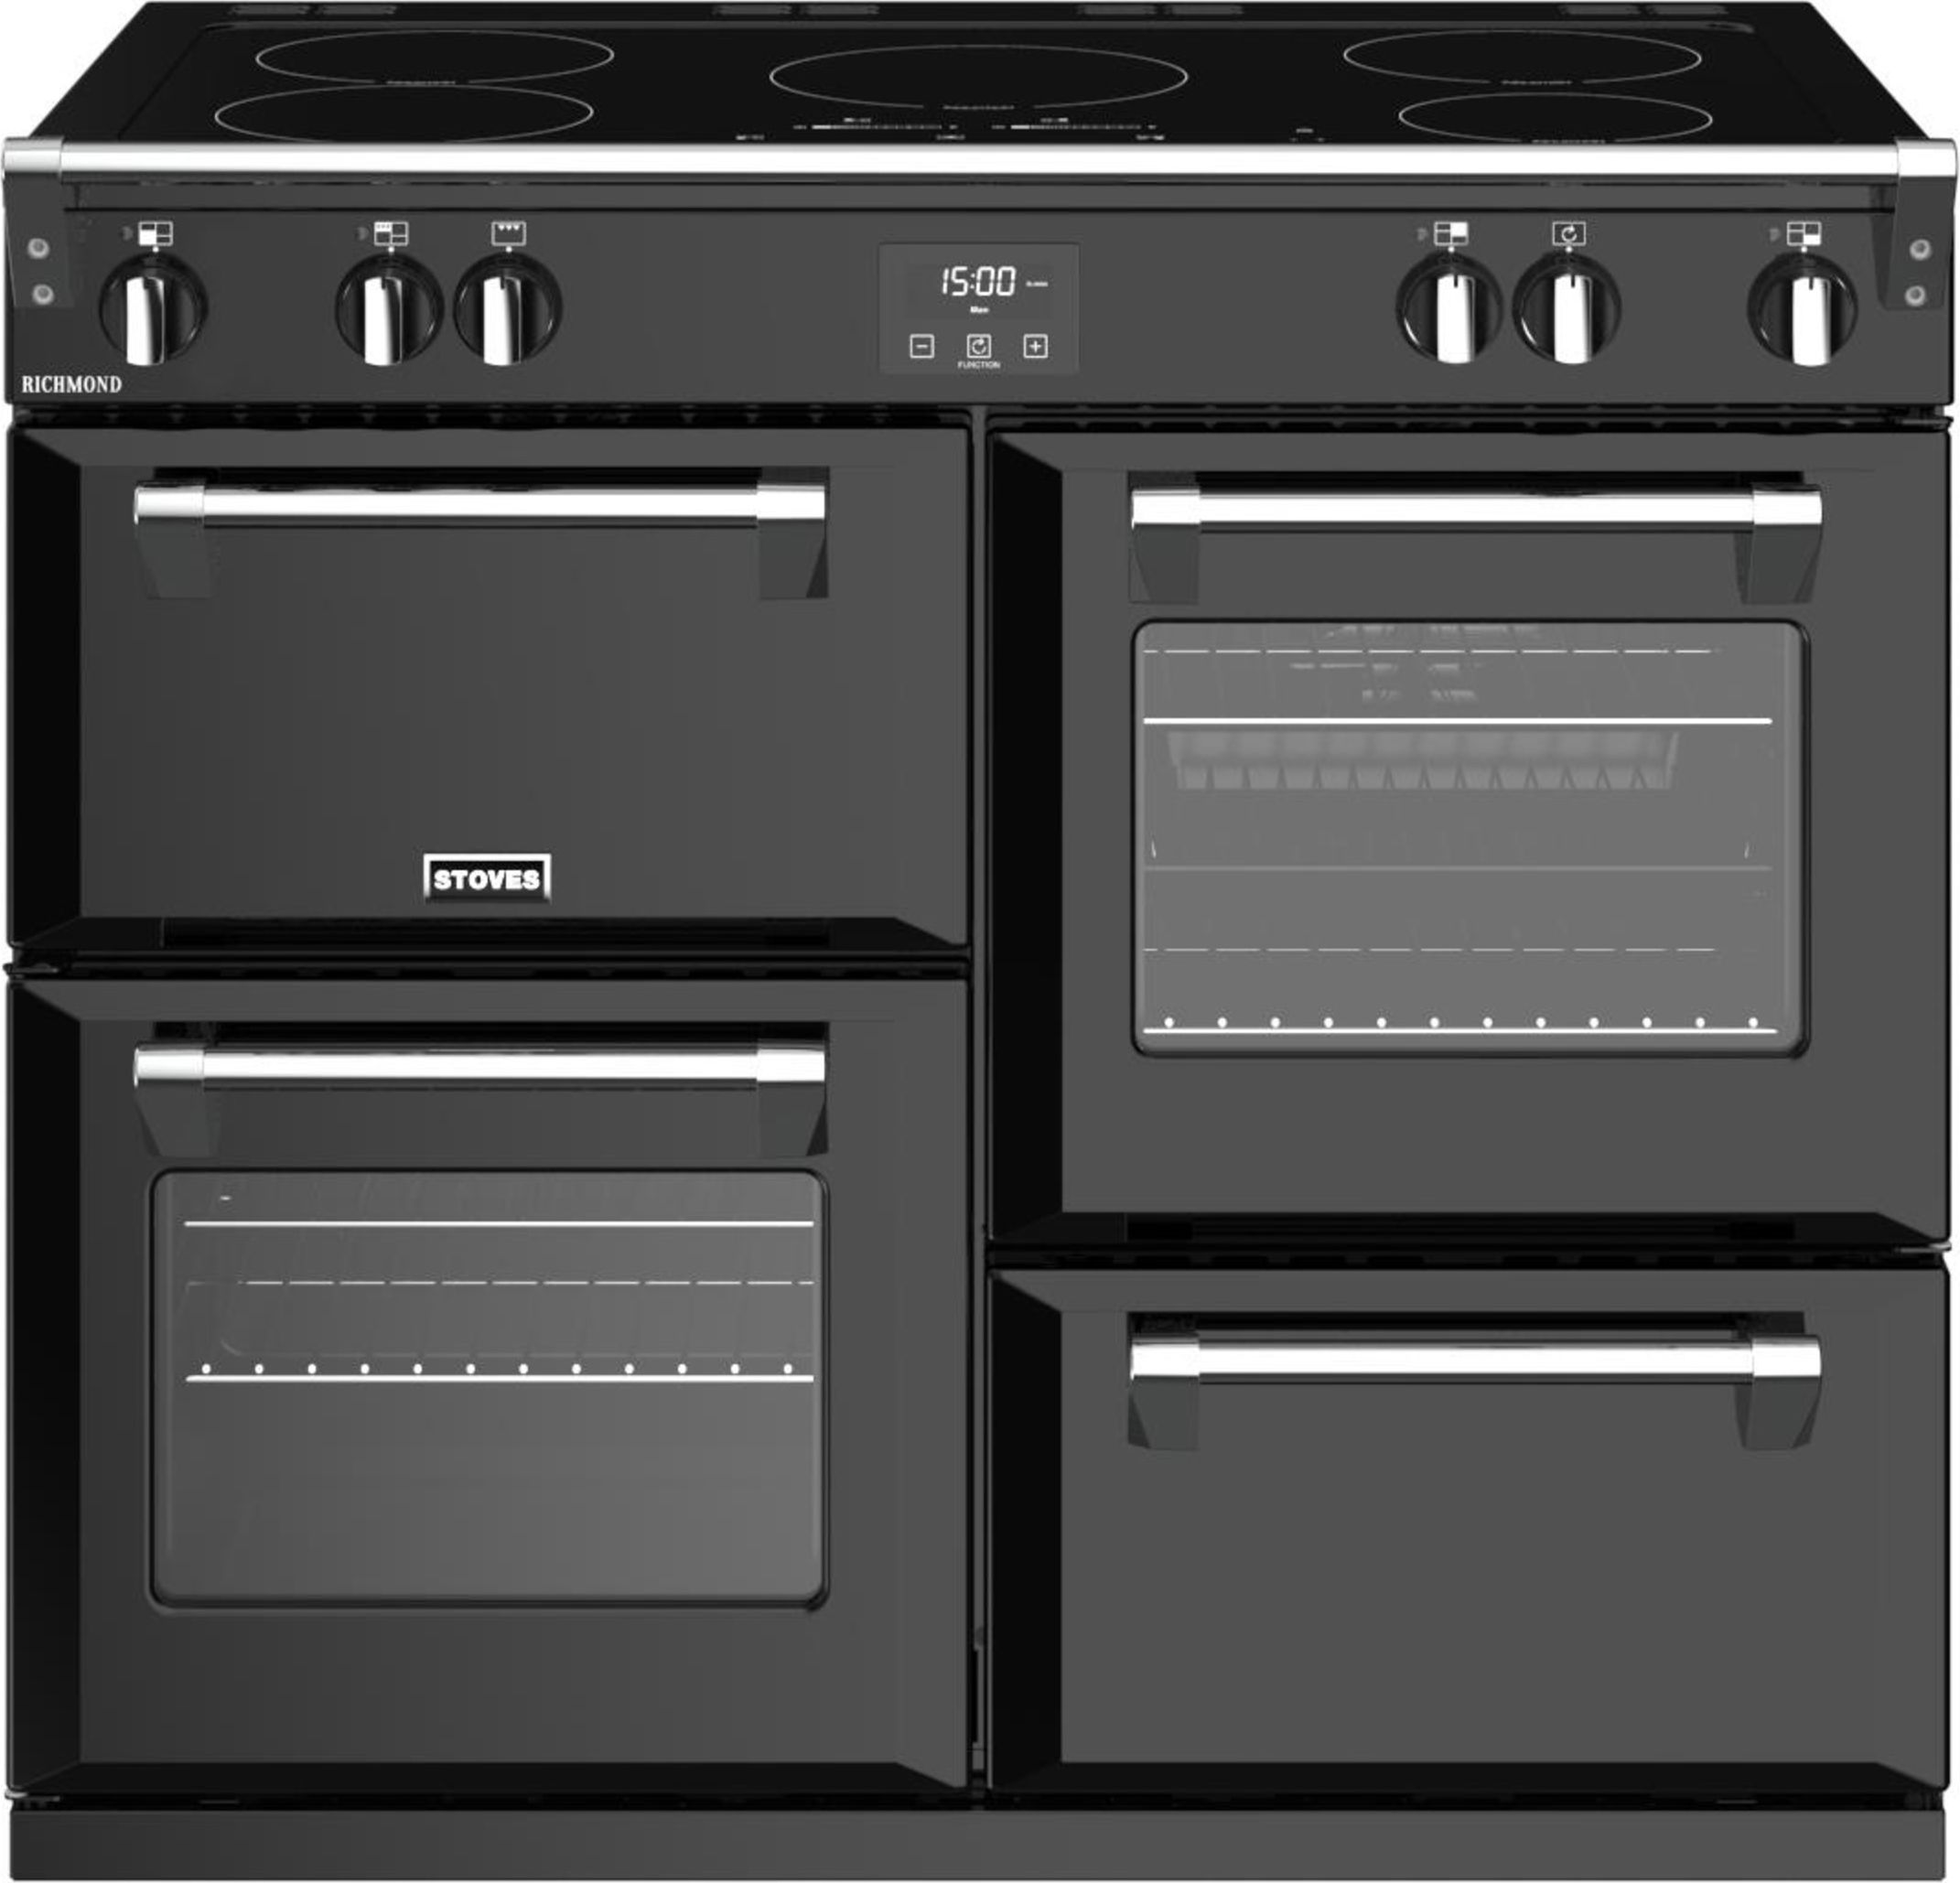 Stoves Richmond ST RICH S1000Ei MK22 BK 100cm Electric Range Cooker with Induction Hob - Black - A Rated, Black